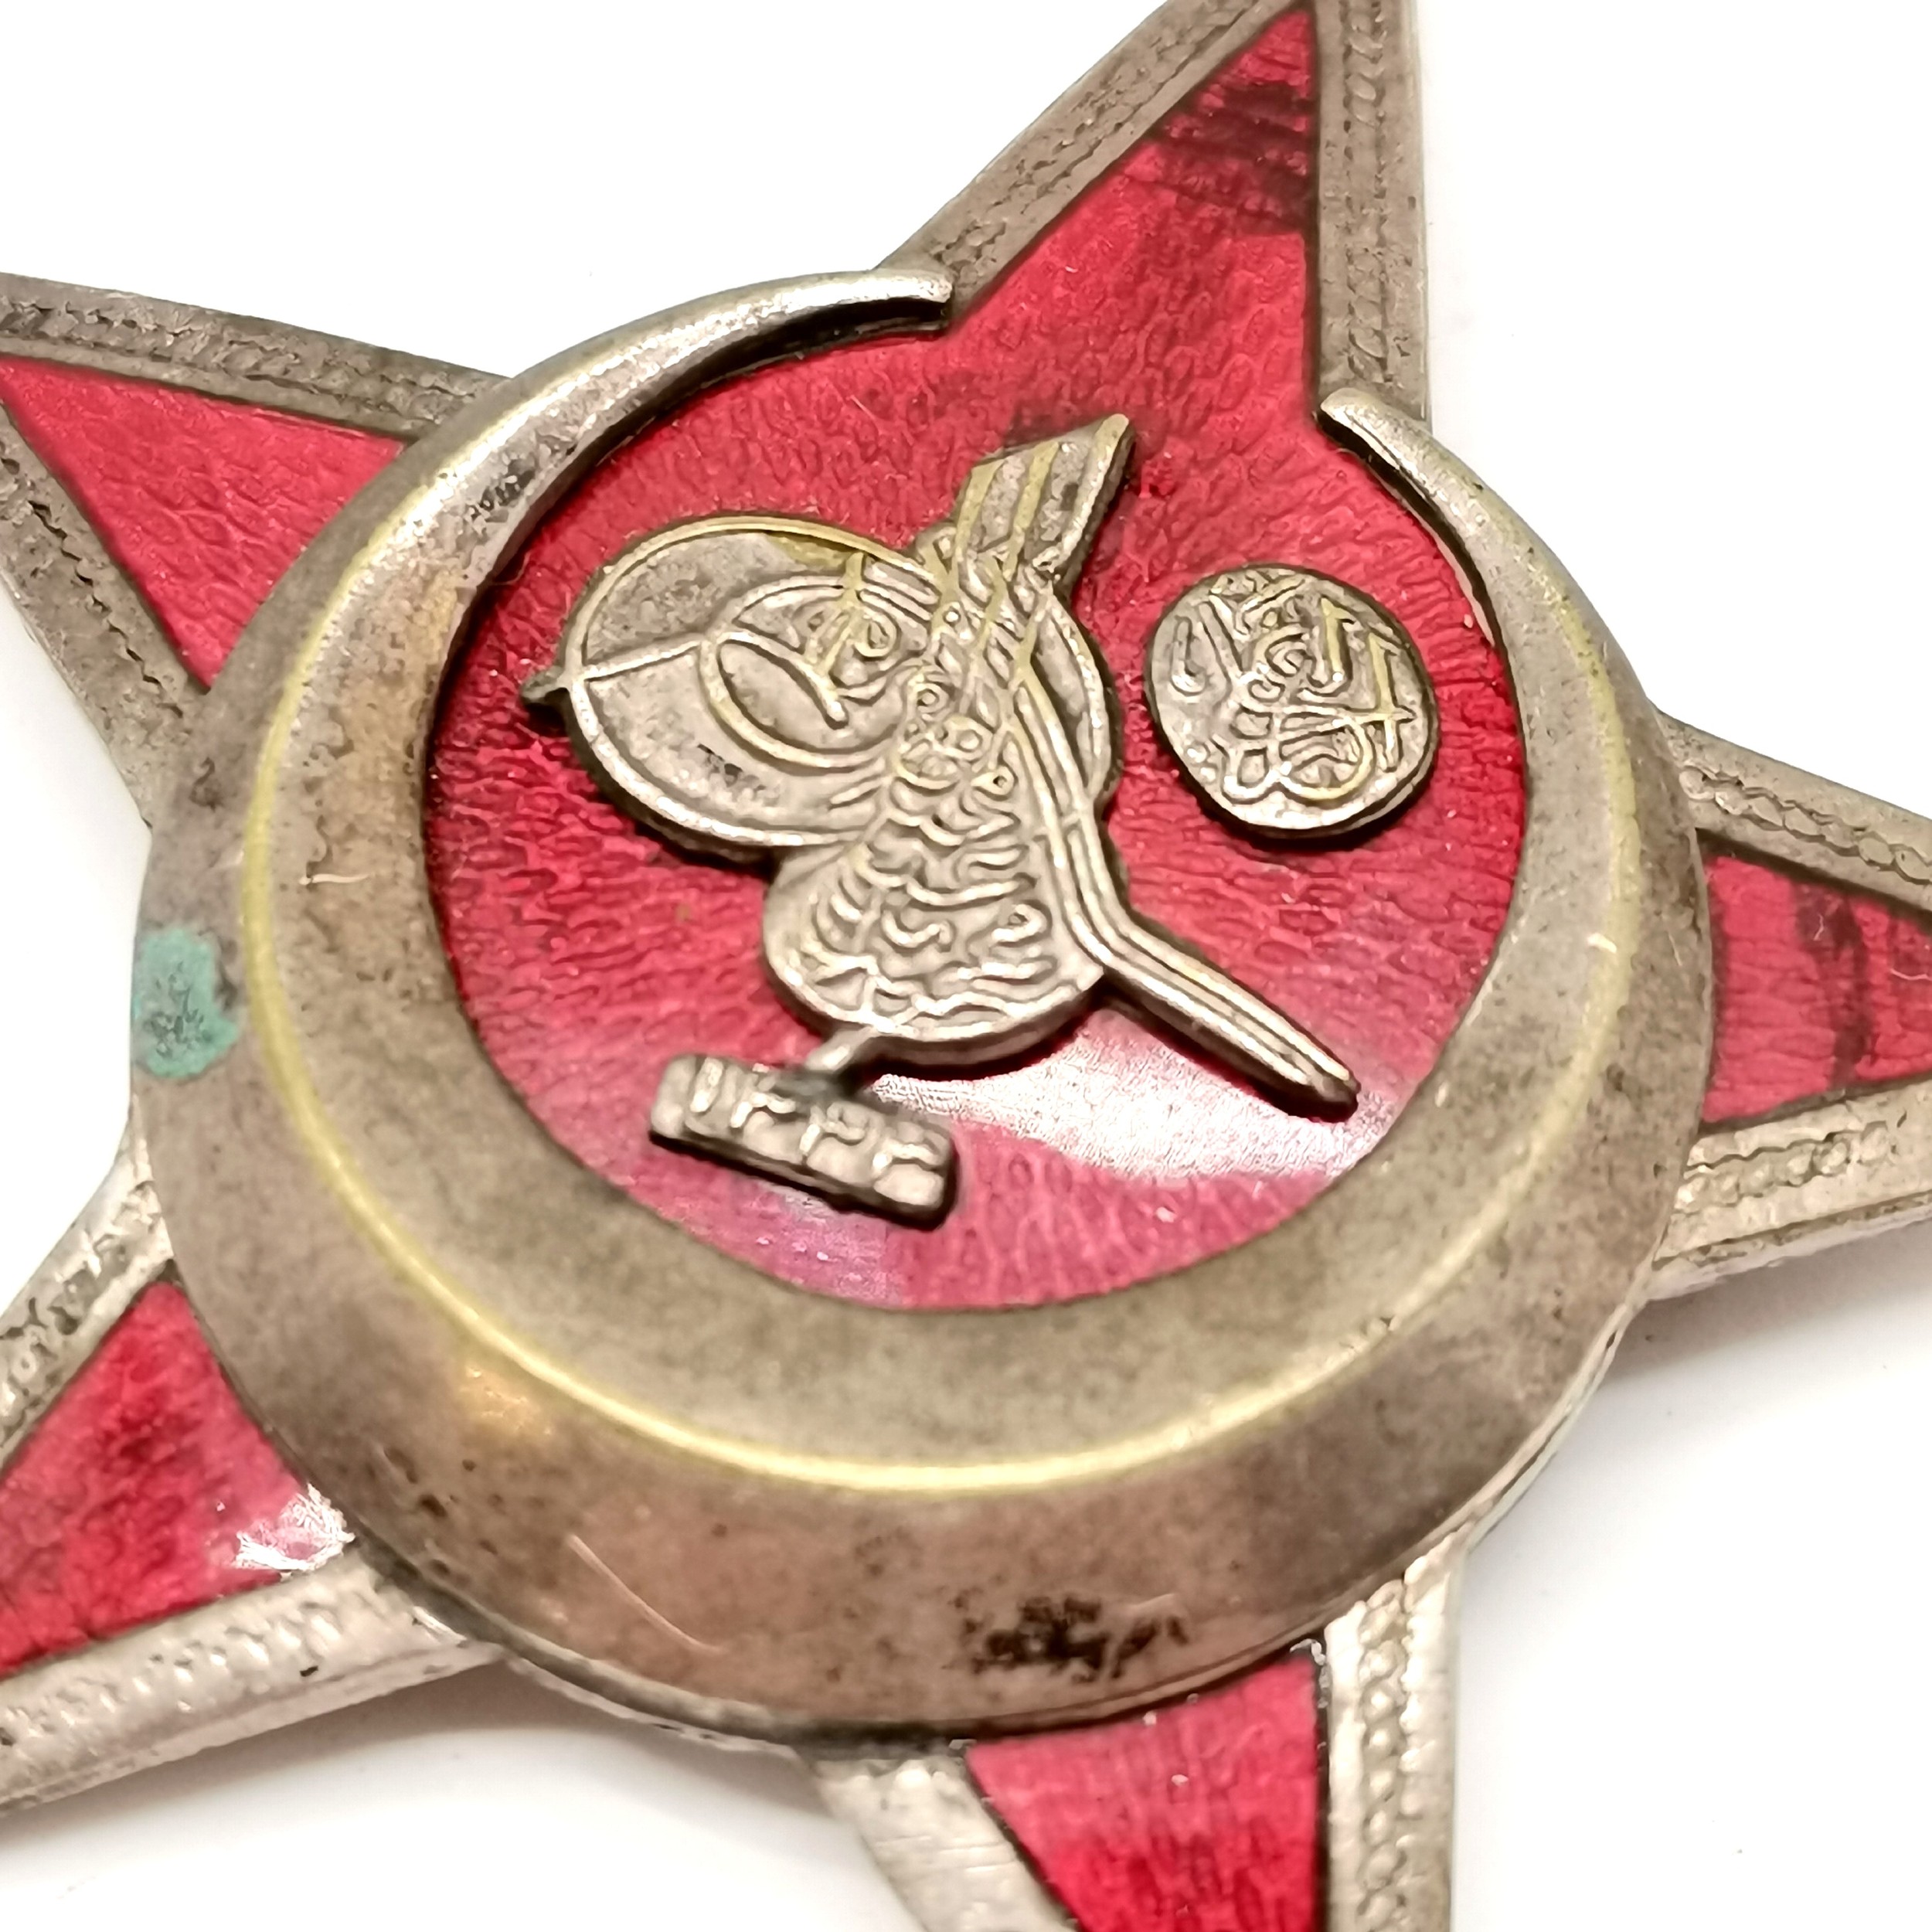 Gallipoli star Ottoman empire medal by B.B. & Co - 5.5cm across & does have stress cracks to the - Image 3 of 3